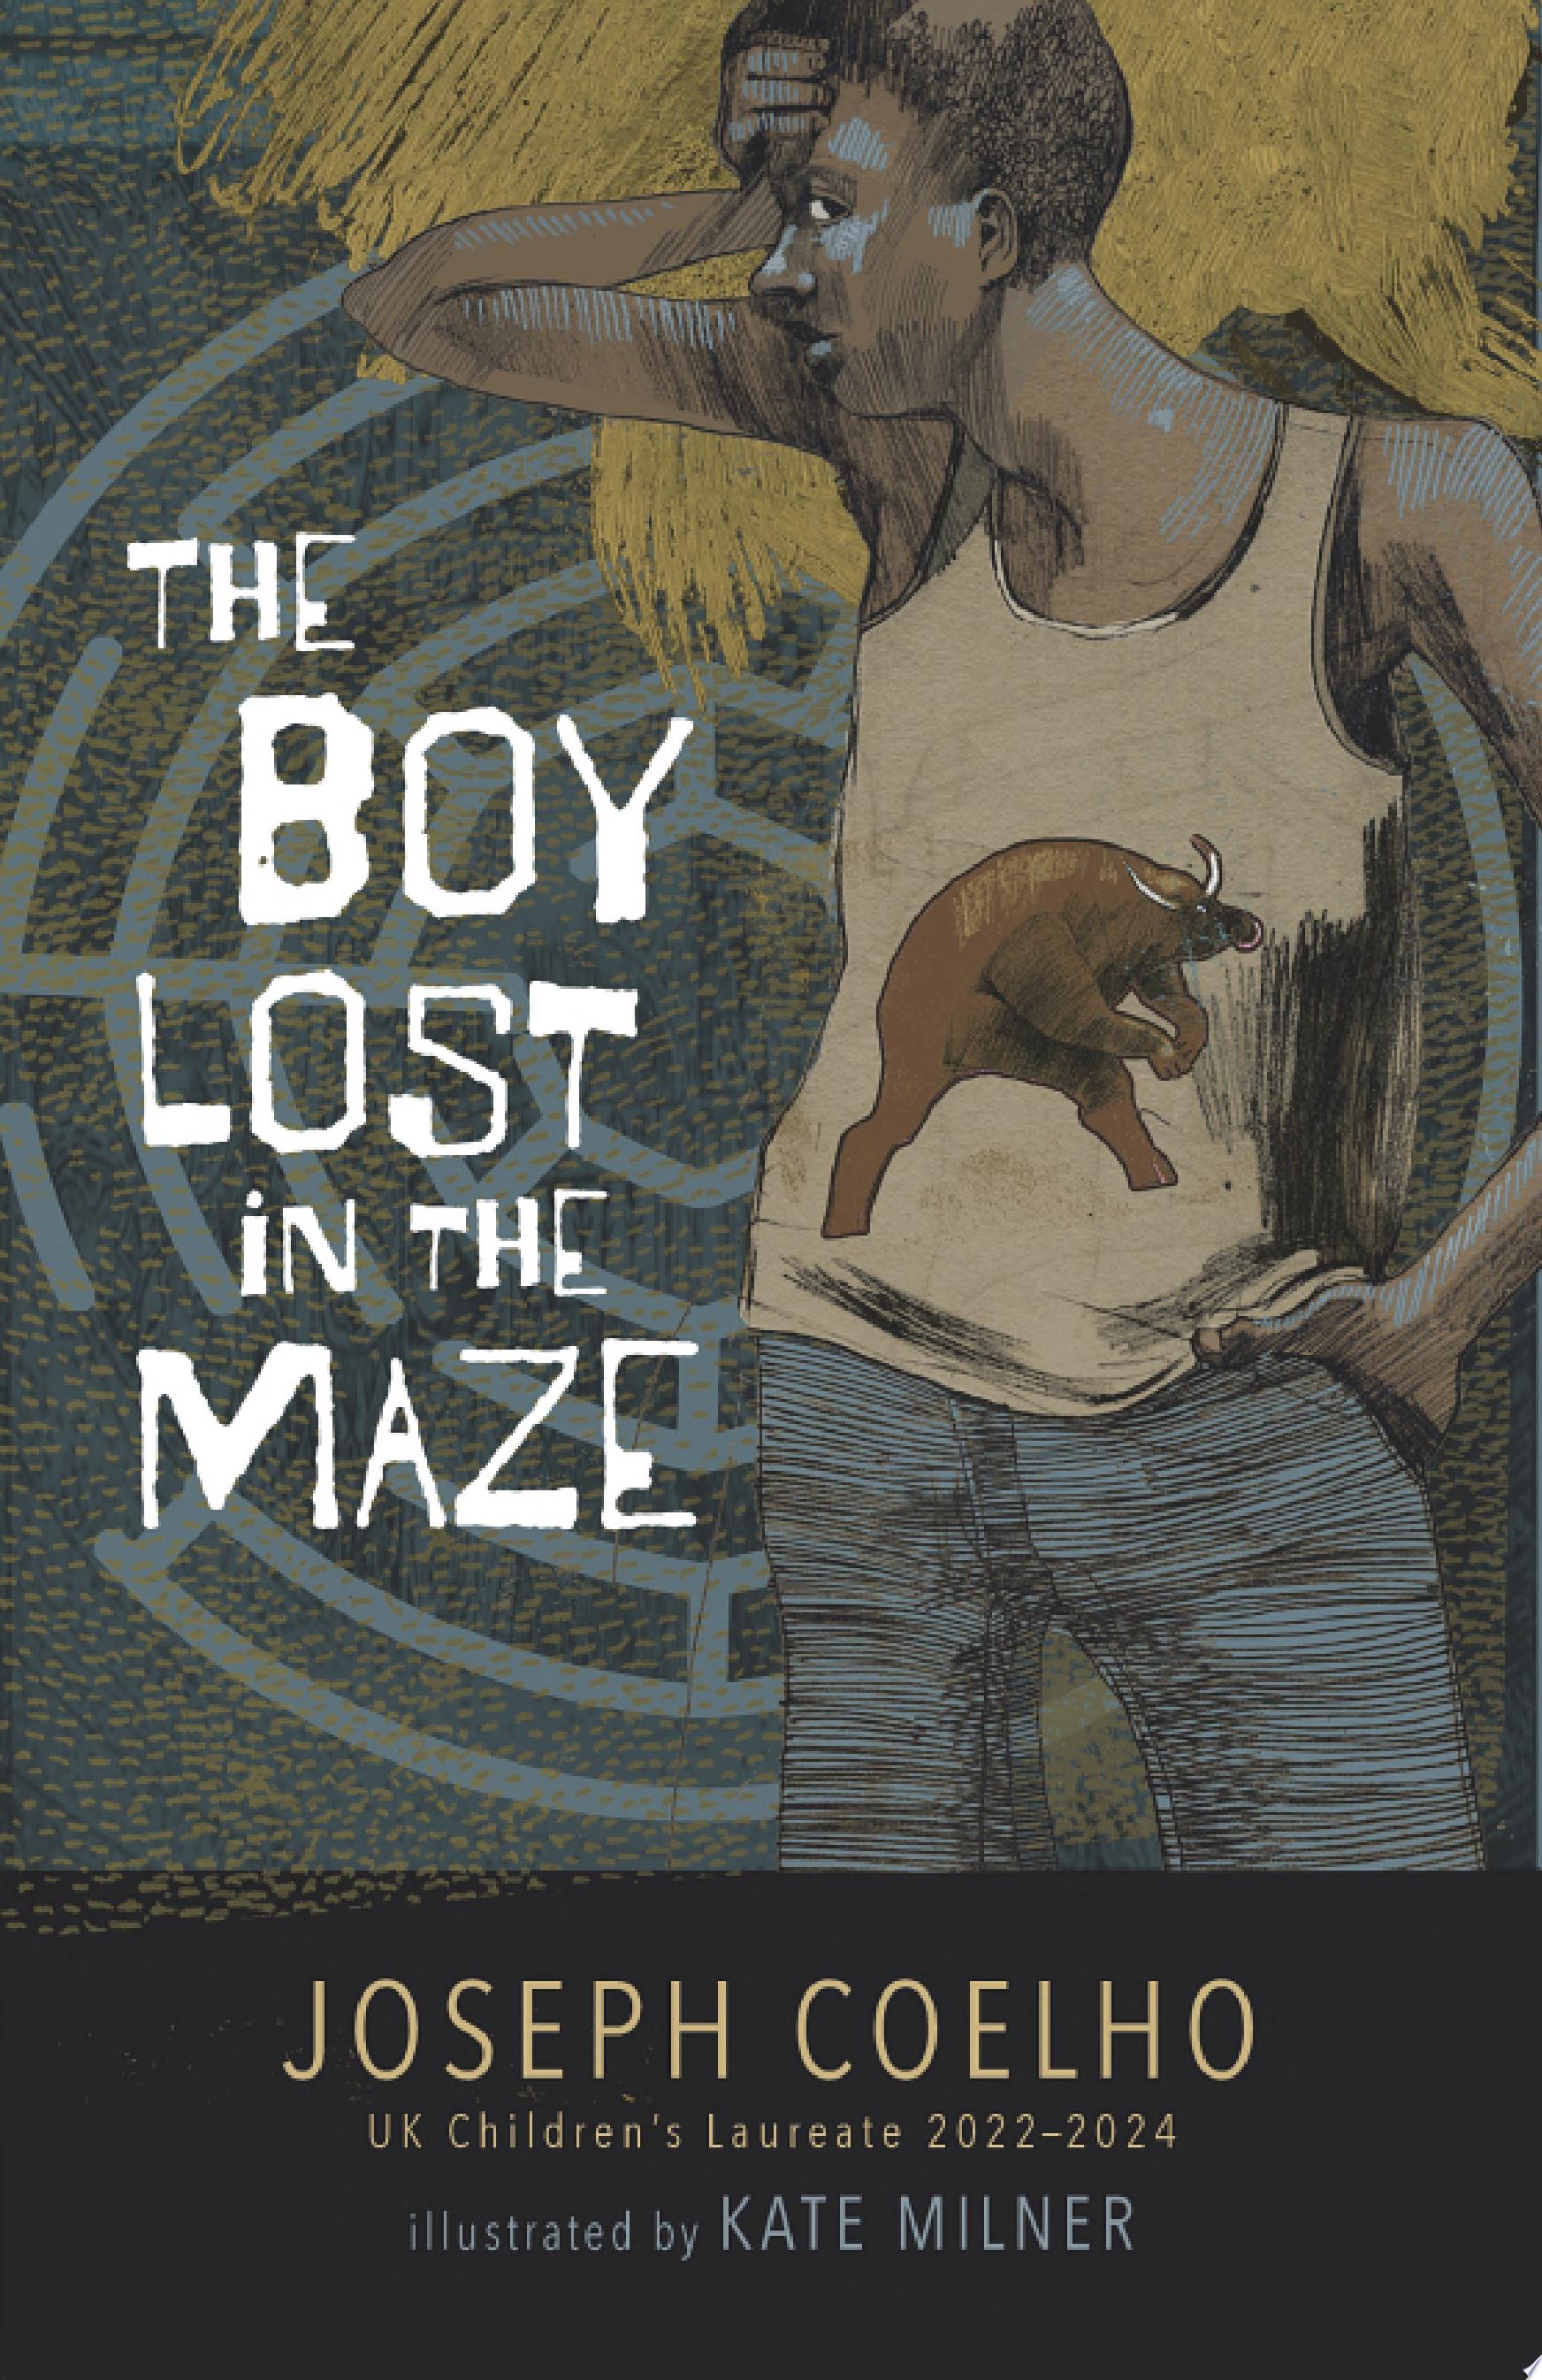 Image for "The Boy Lost in the Maze"